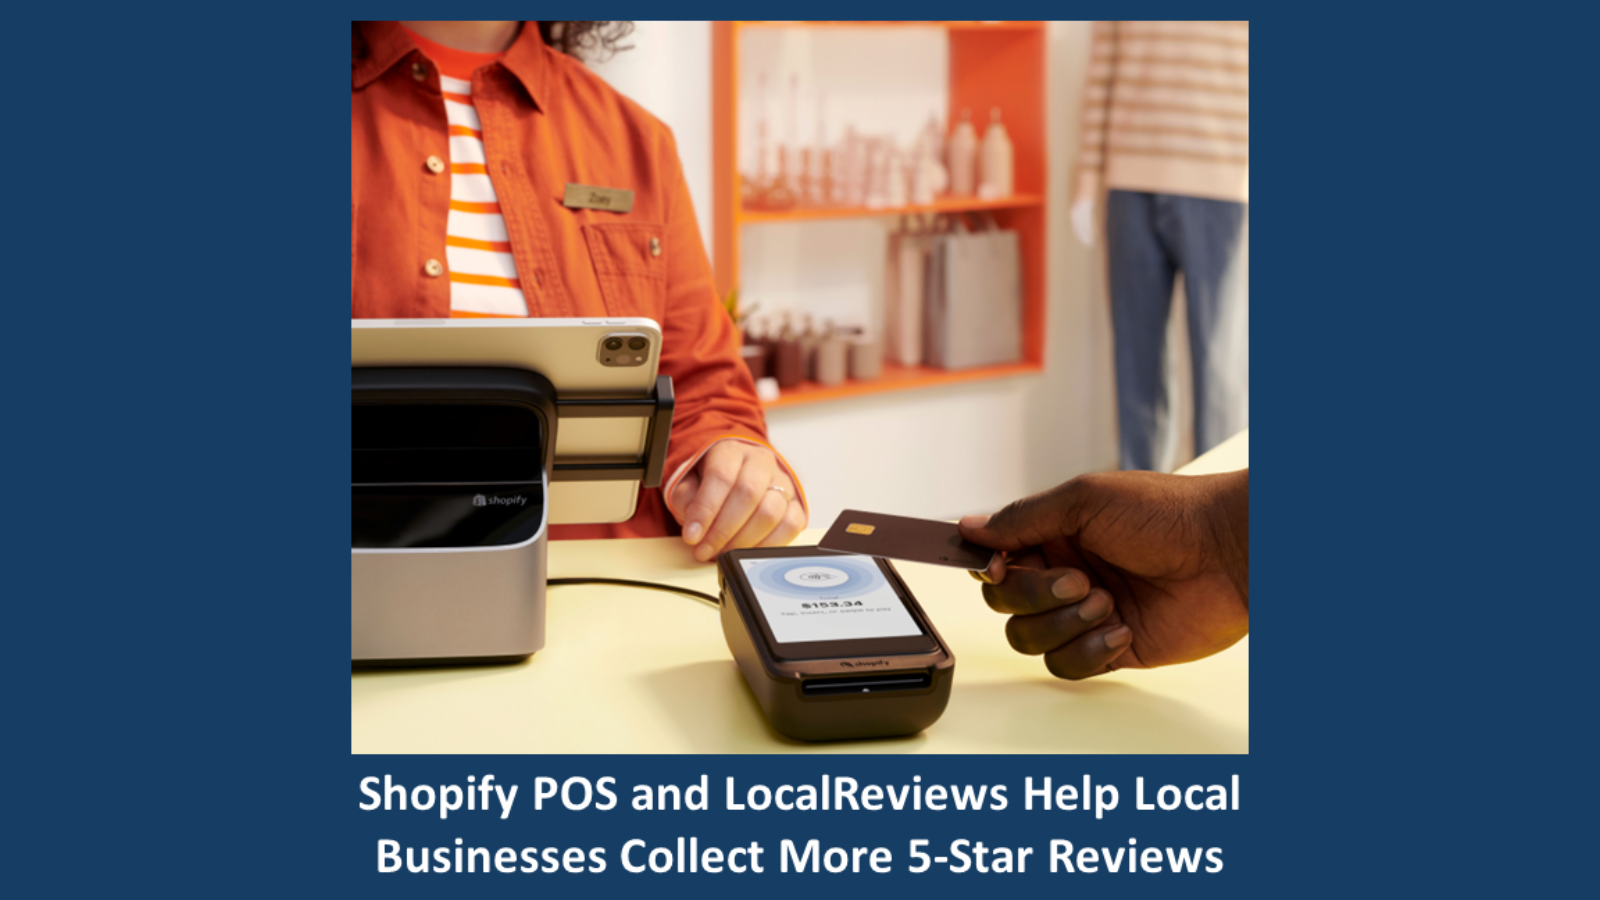 Shopify POS Integrates with LocalReviews